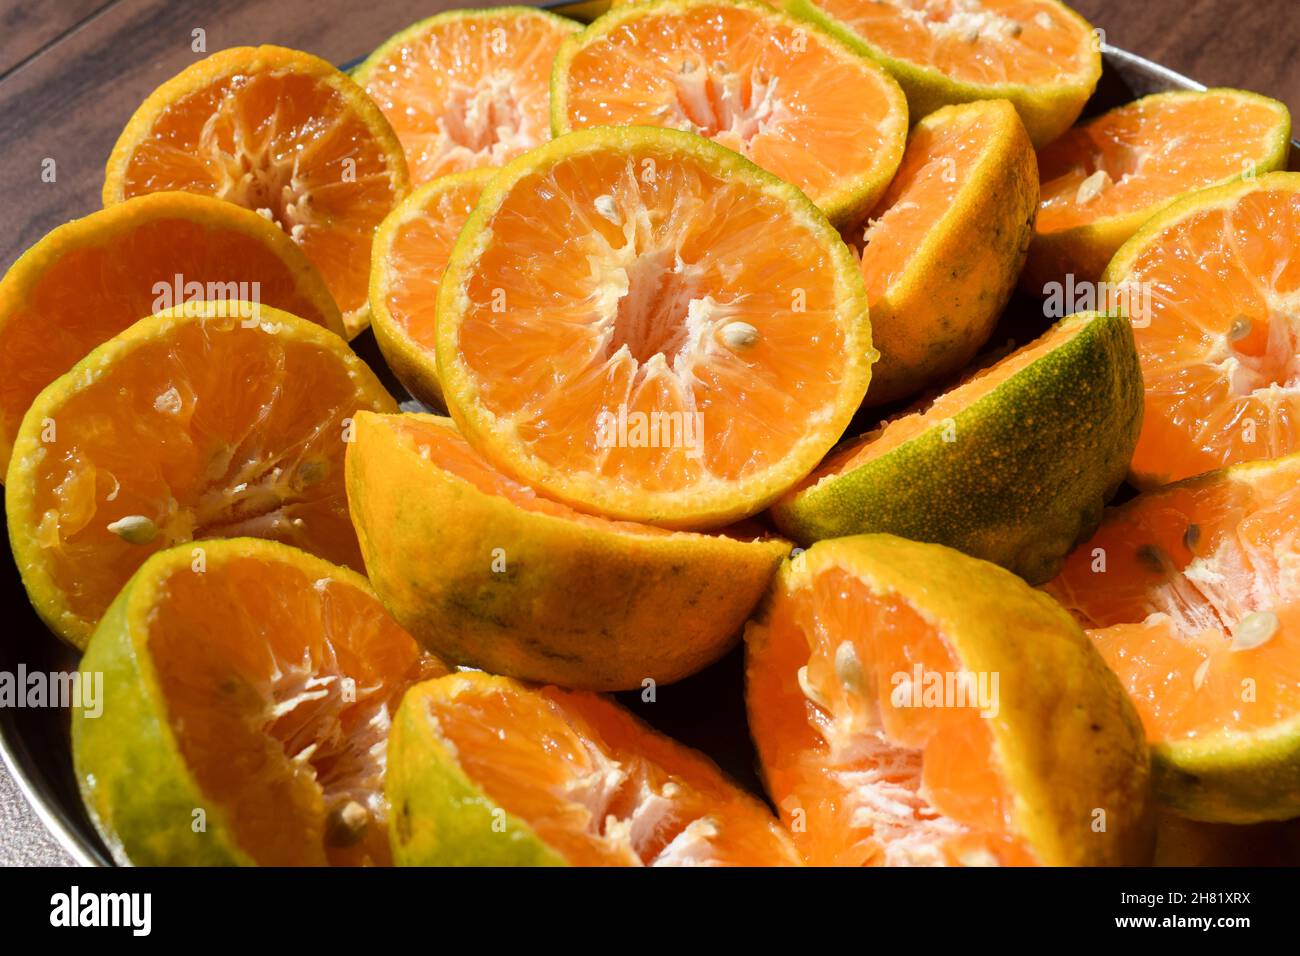 Orange, Malta fruits sliced in to half to take out juice Stock Photo